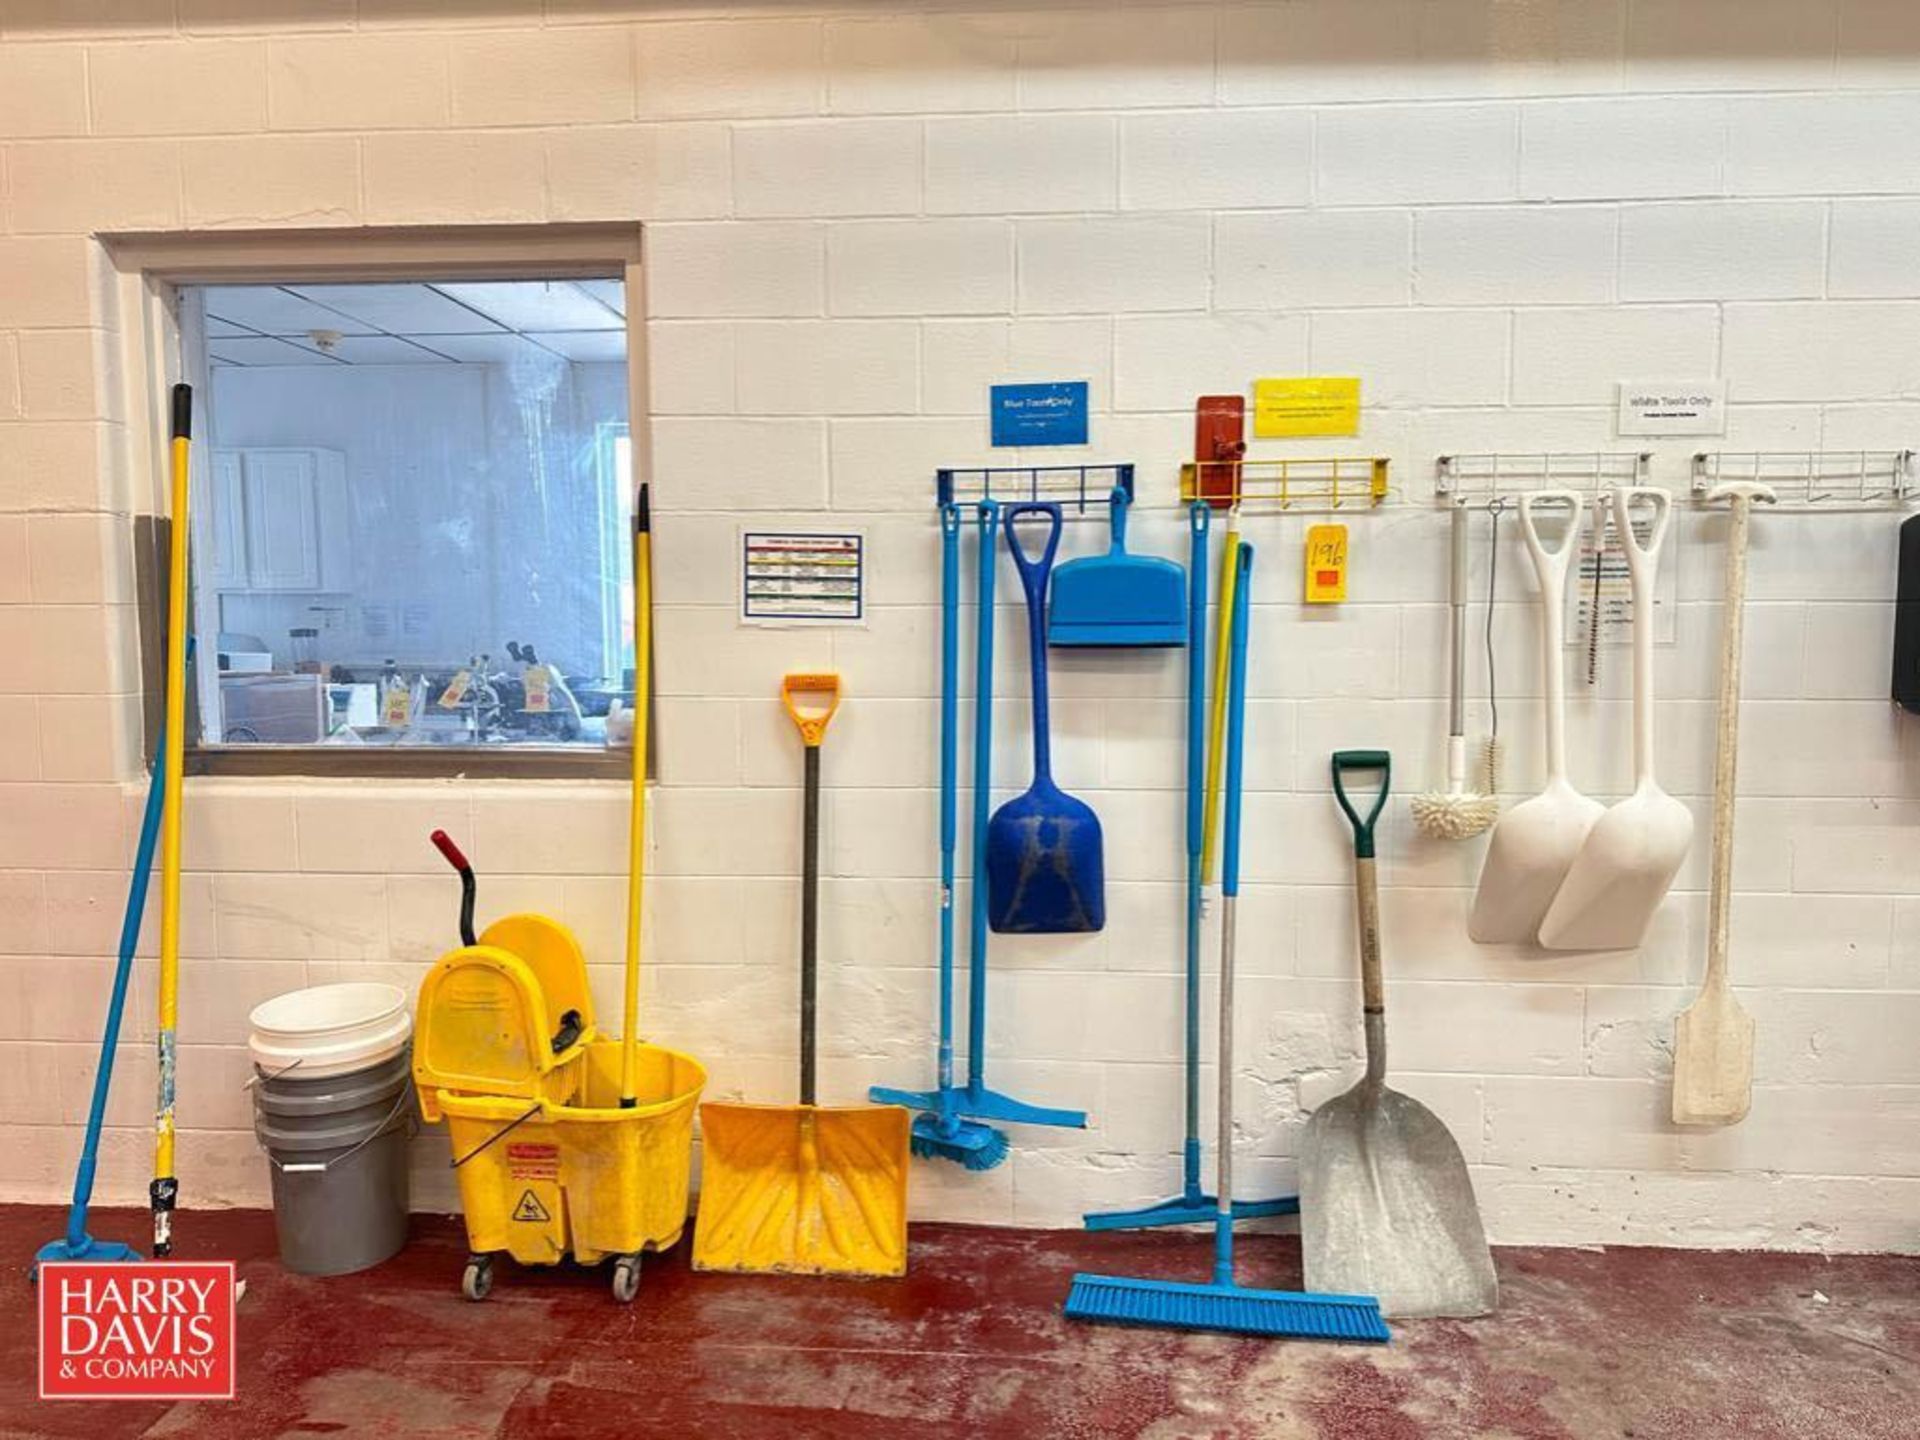 Wall-Mounted Utility Racks with Assorted Shovels, Brooms and Dust Pans